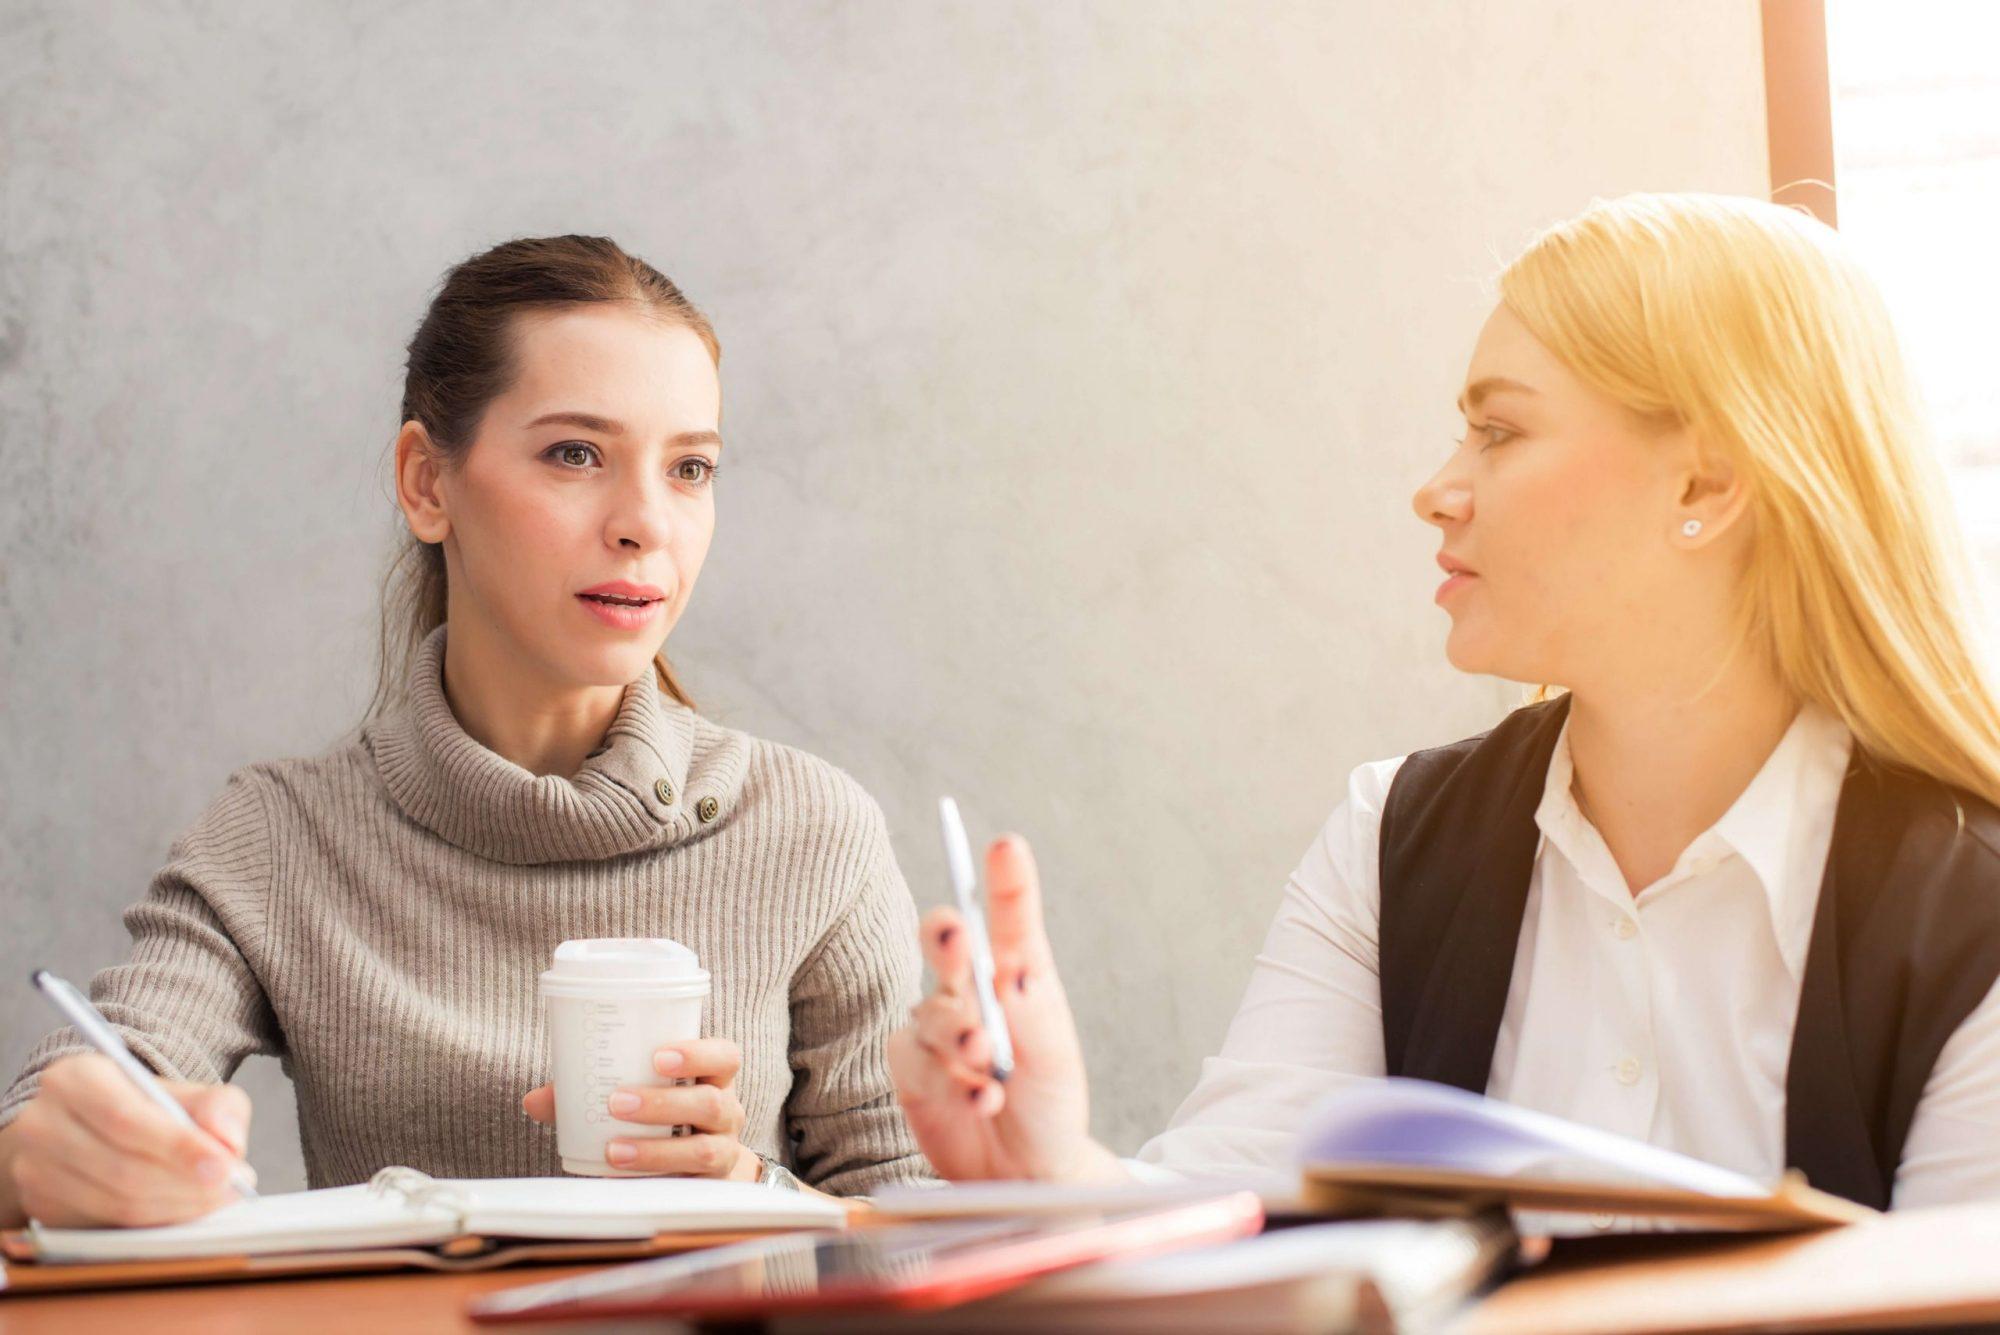 4 Parts of an Effective One-on-One Meeting